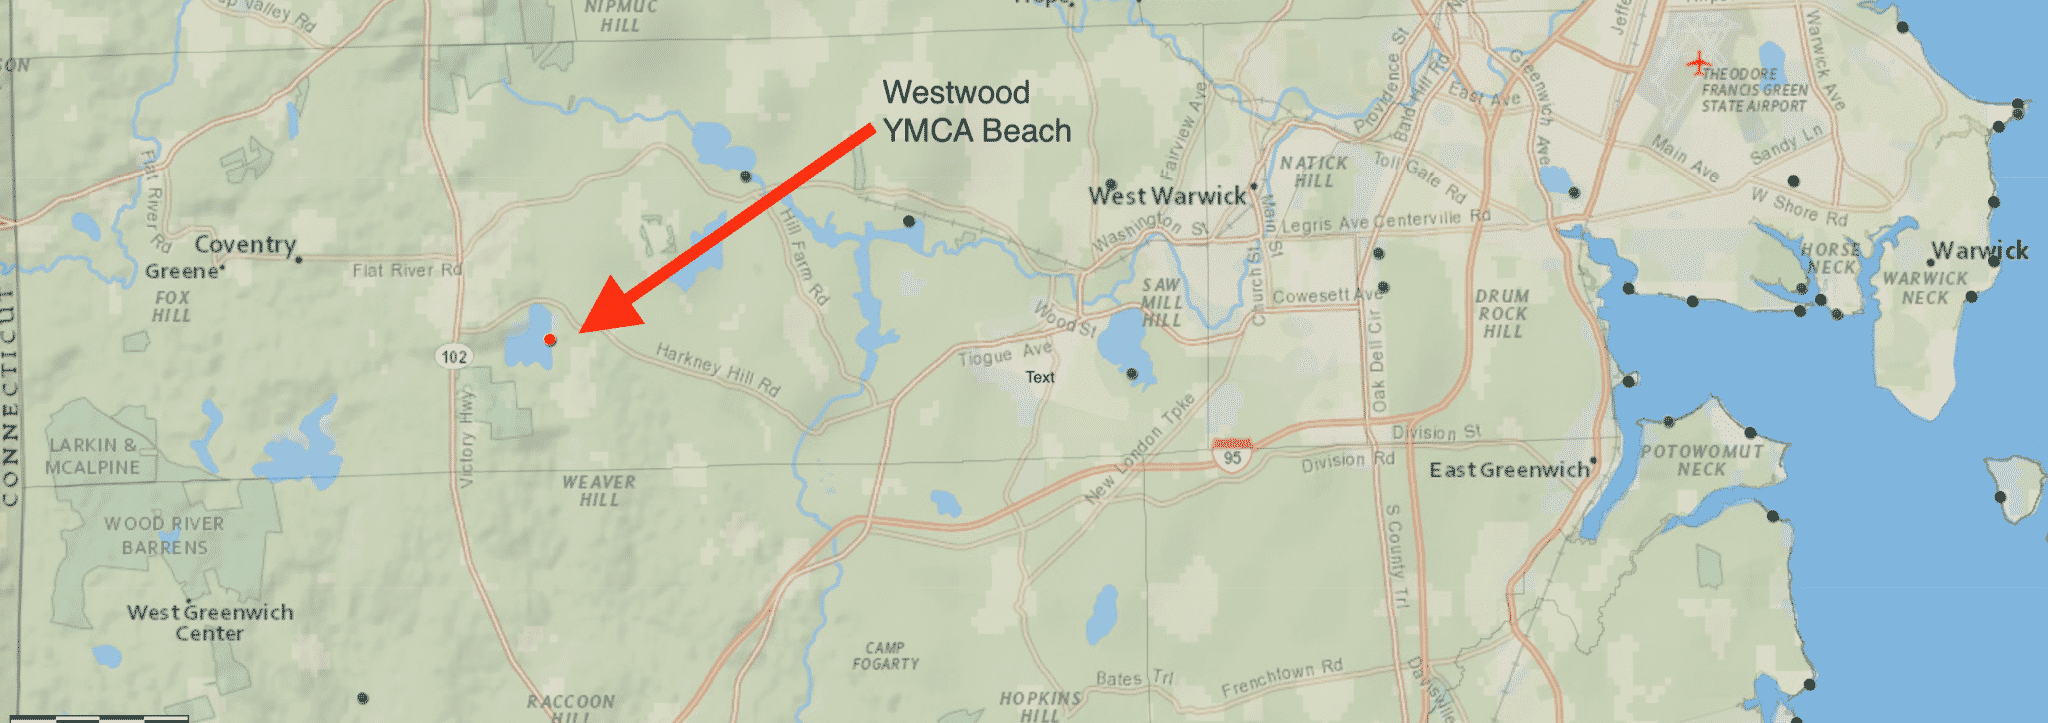 [CREDIT: RIDOH] Westwood YMCA Beach was closed July 2 due to high bacteria levels.